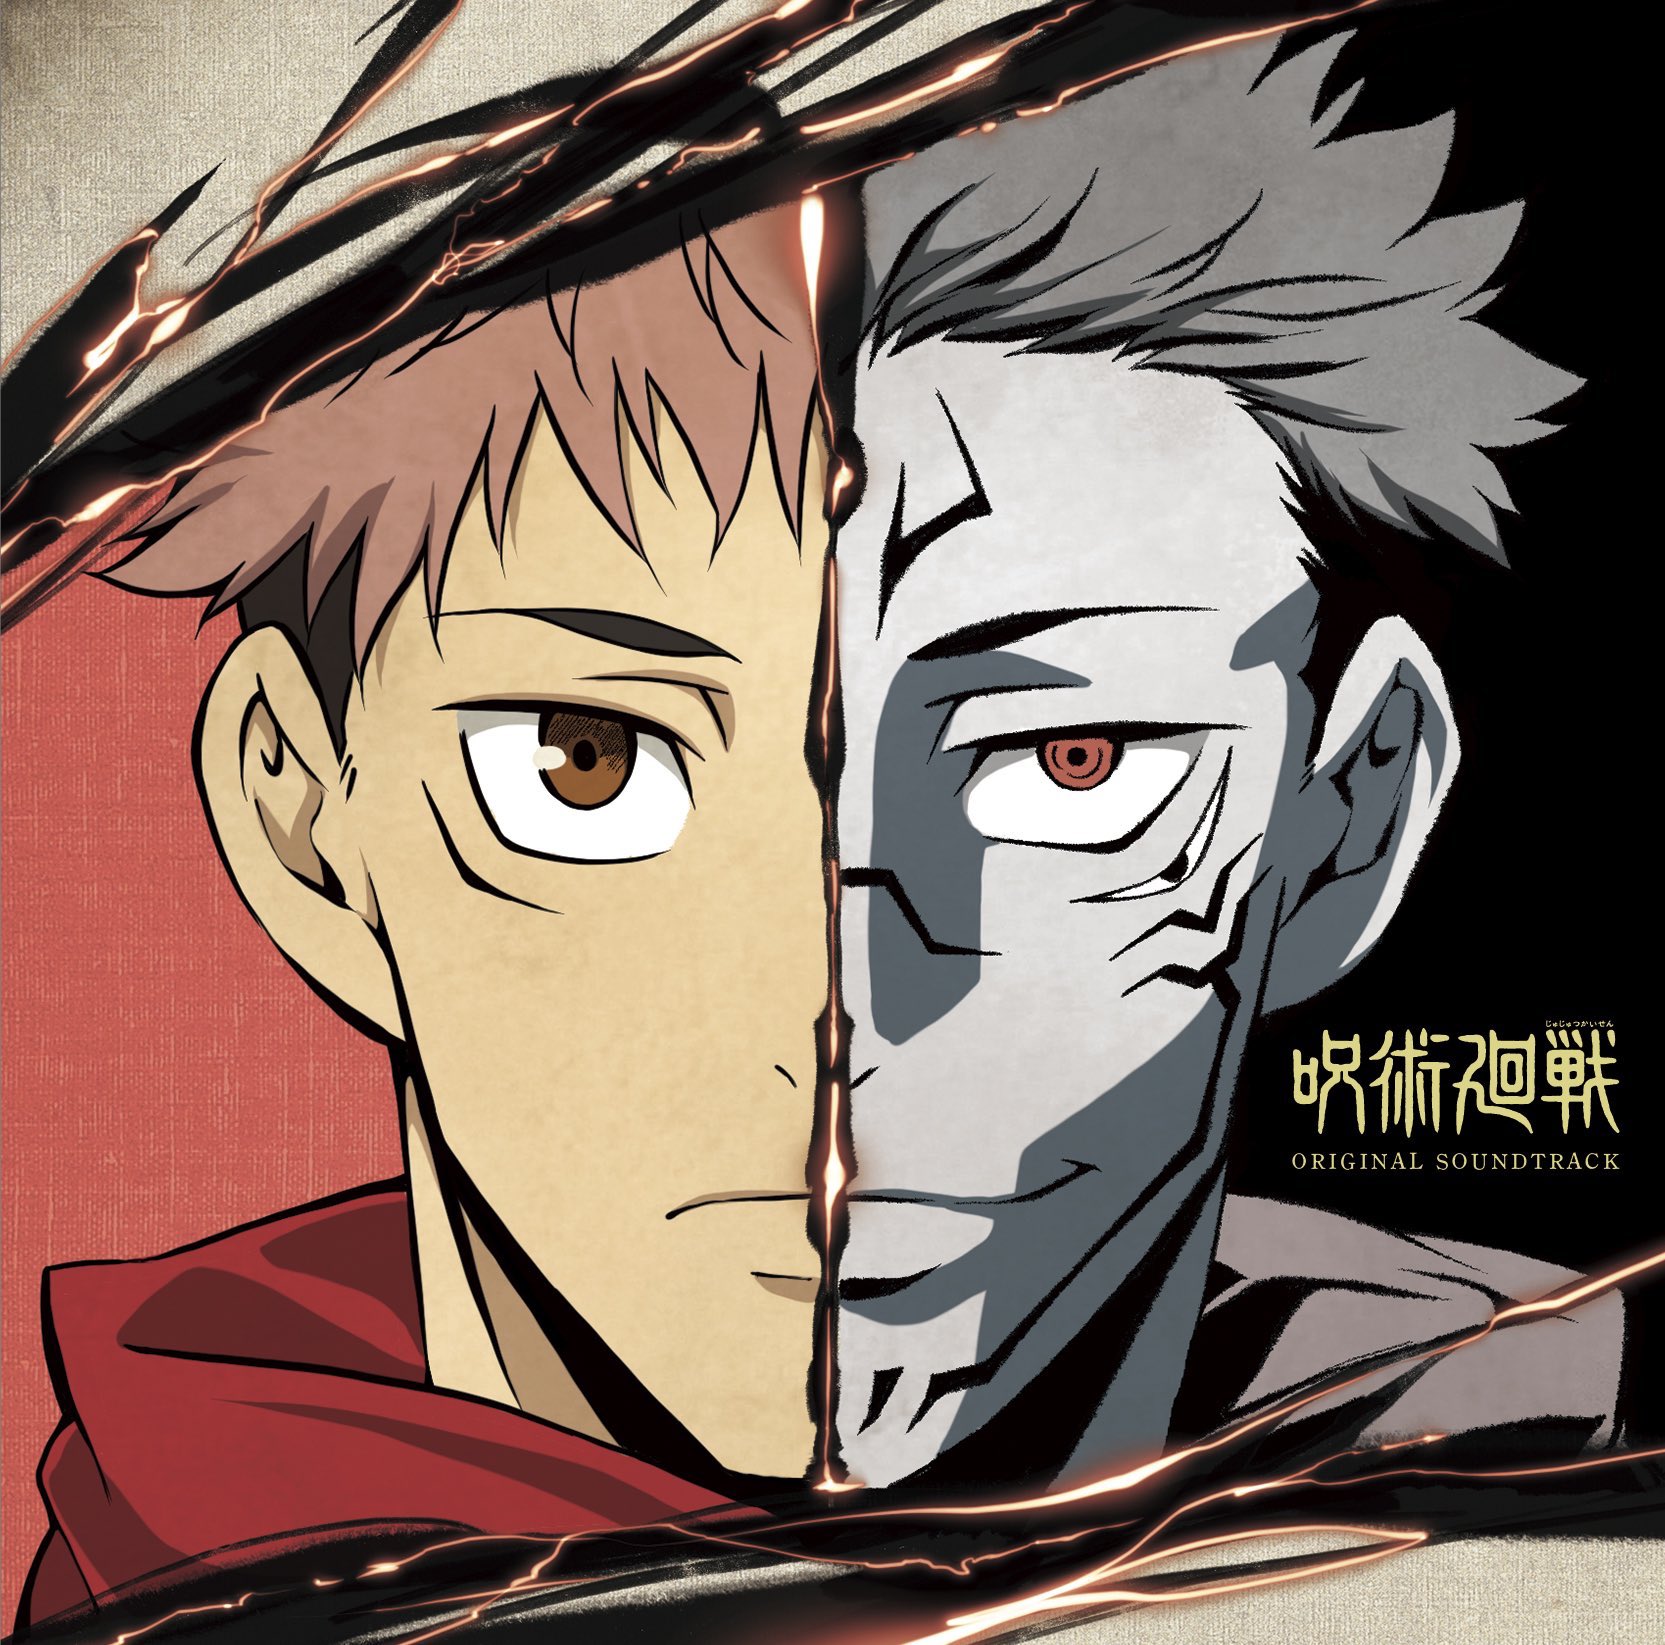 Jujutsu Kaisen On Twitter The Jujutsu Kaisen Anime Ost Is Officially Out Now On Several Platforms The Full Rollout Should Happen Between Now And Tomorrow Depending On Your Location Https T Co Jgx3pe9wco